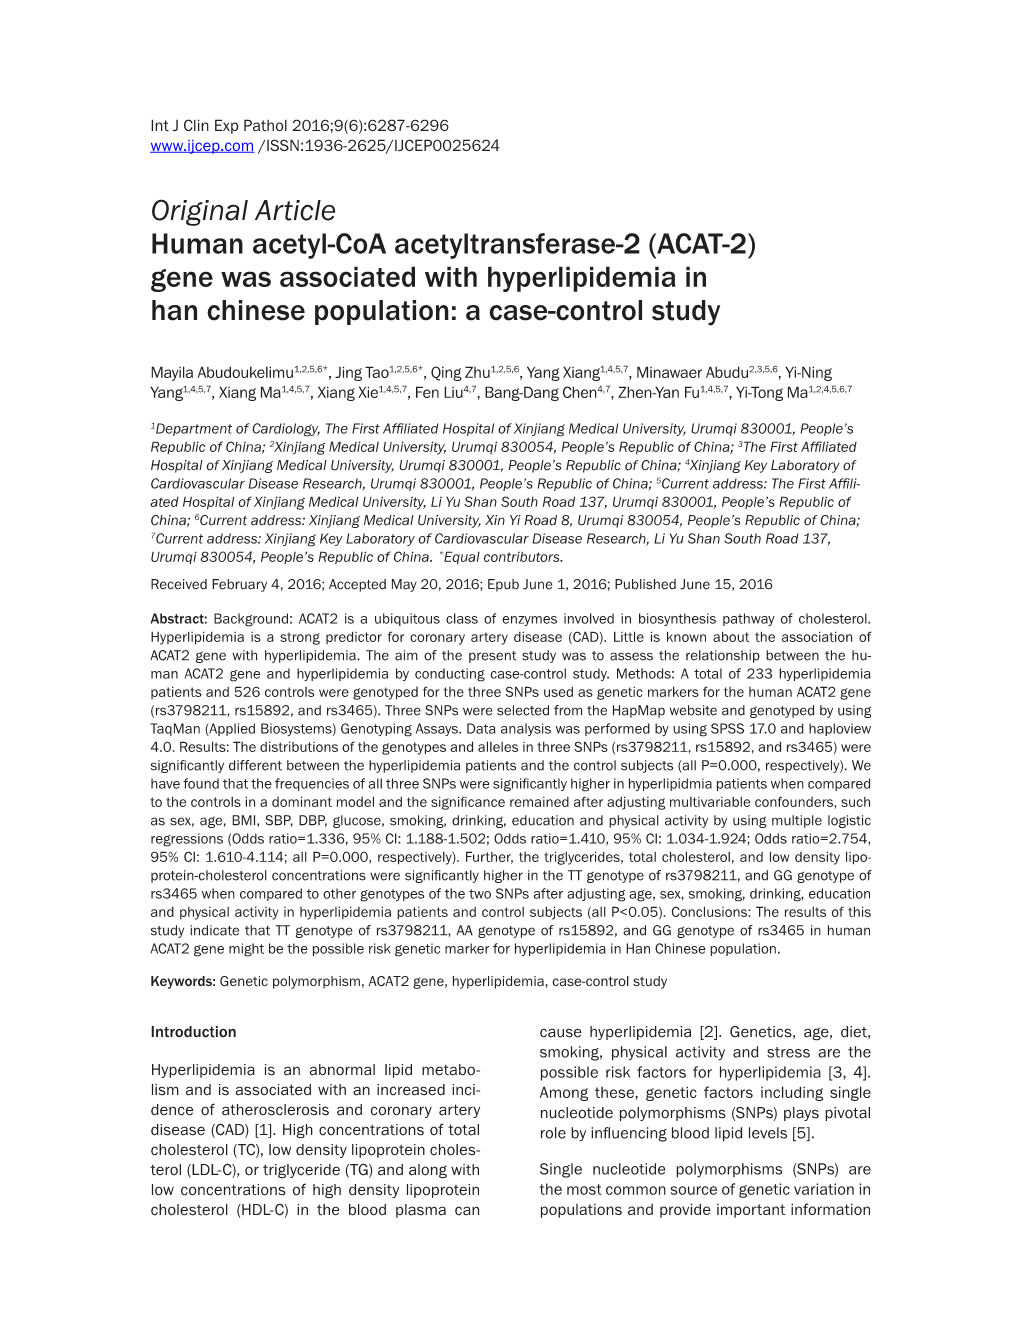 Original Article Human Acetyl-Coa Acetyltransferase-2 (ACAT-2) Gene Was Associated with Hyperlipidemia in Han Chinese Population: a Case-Control Study